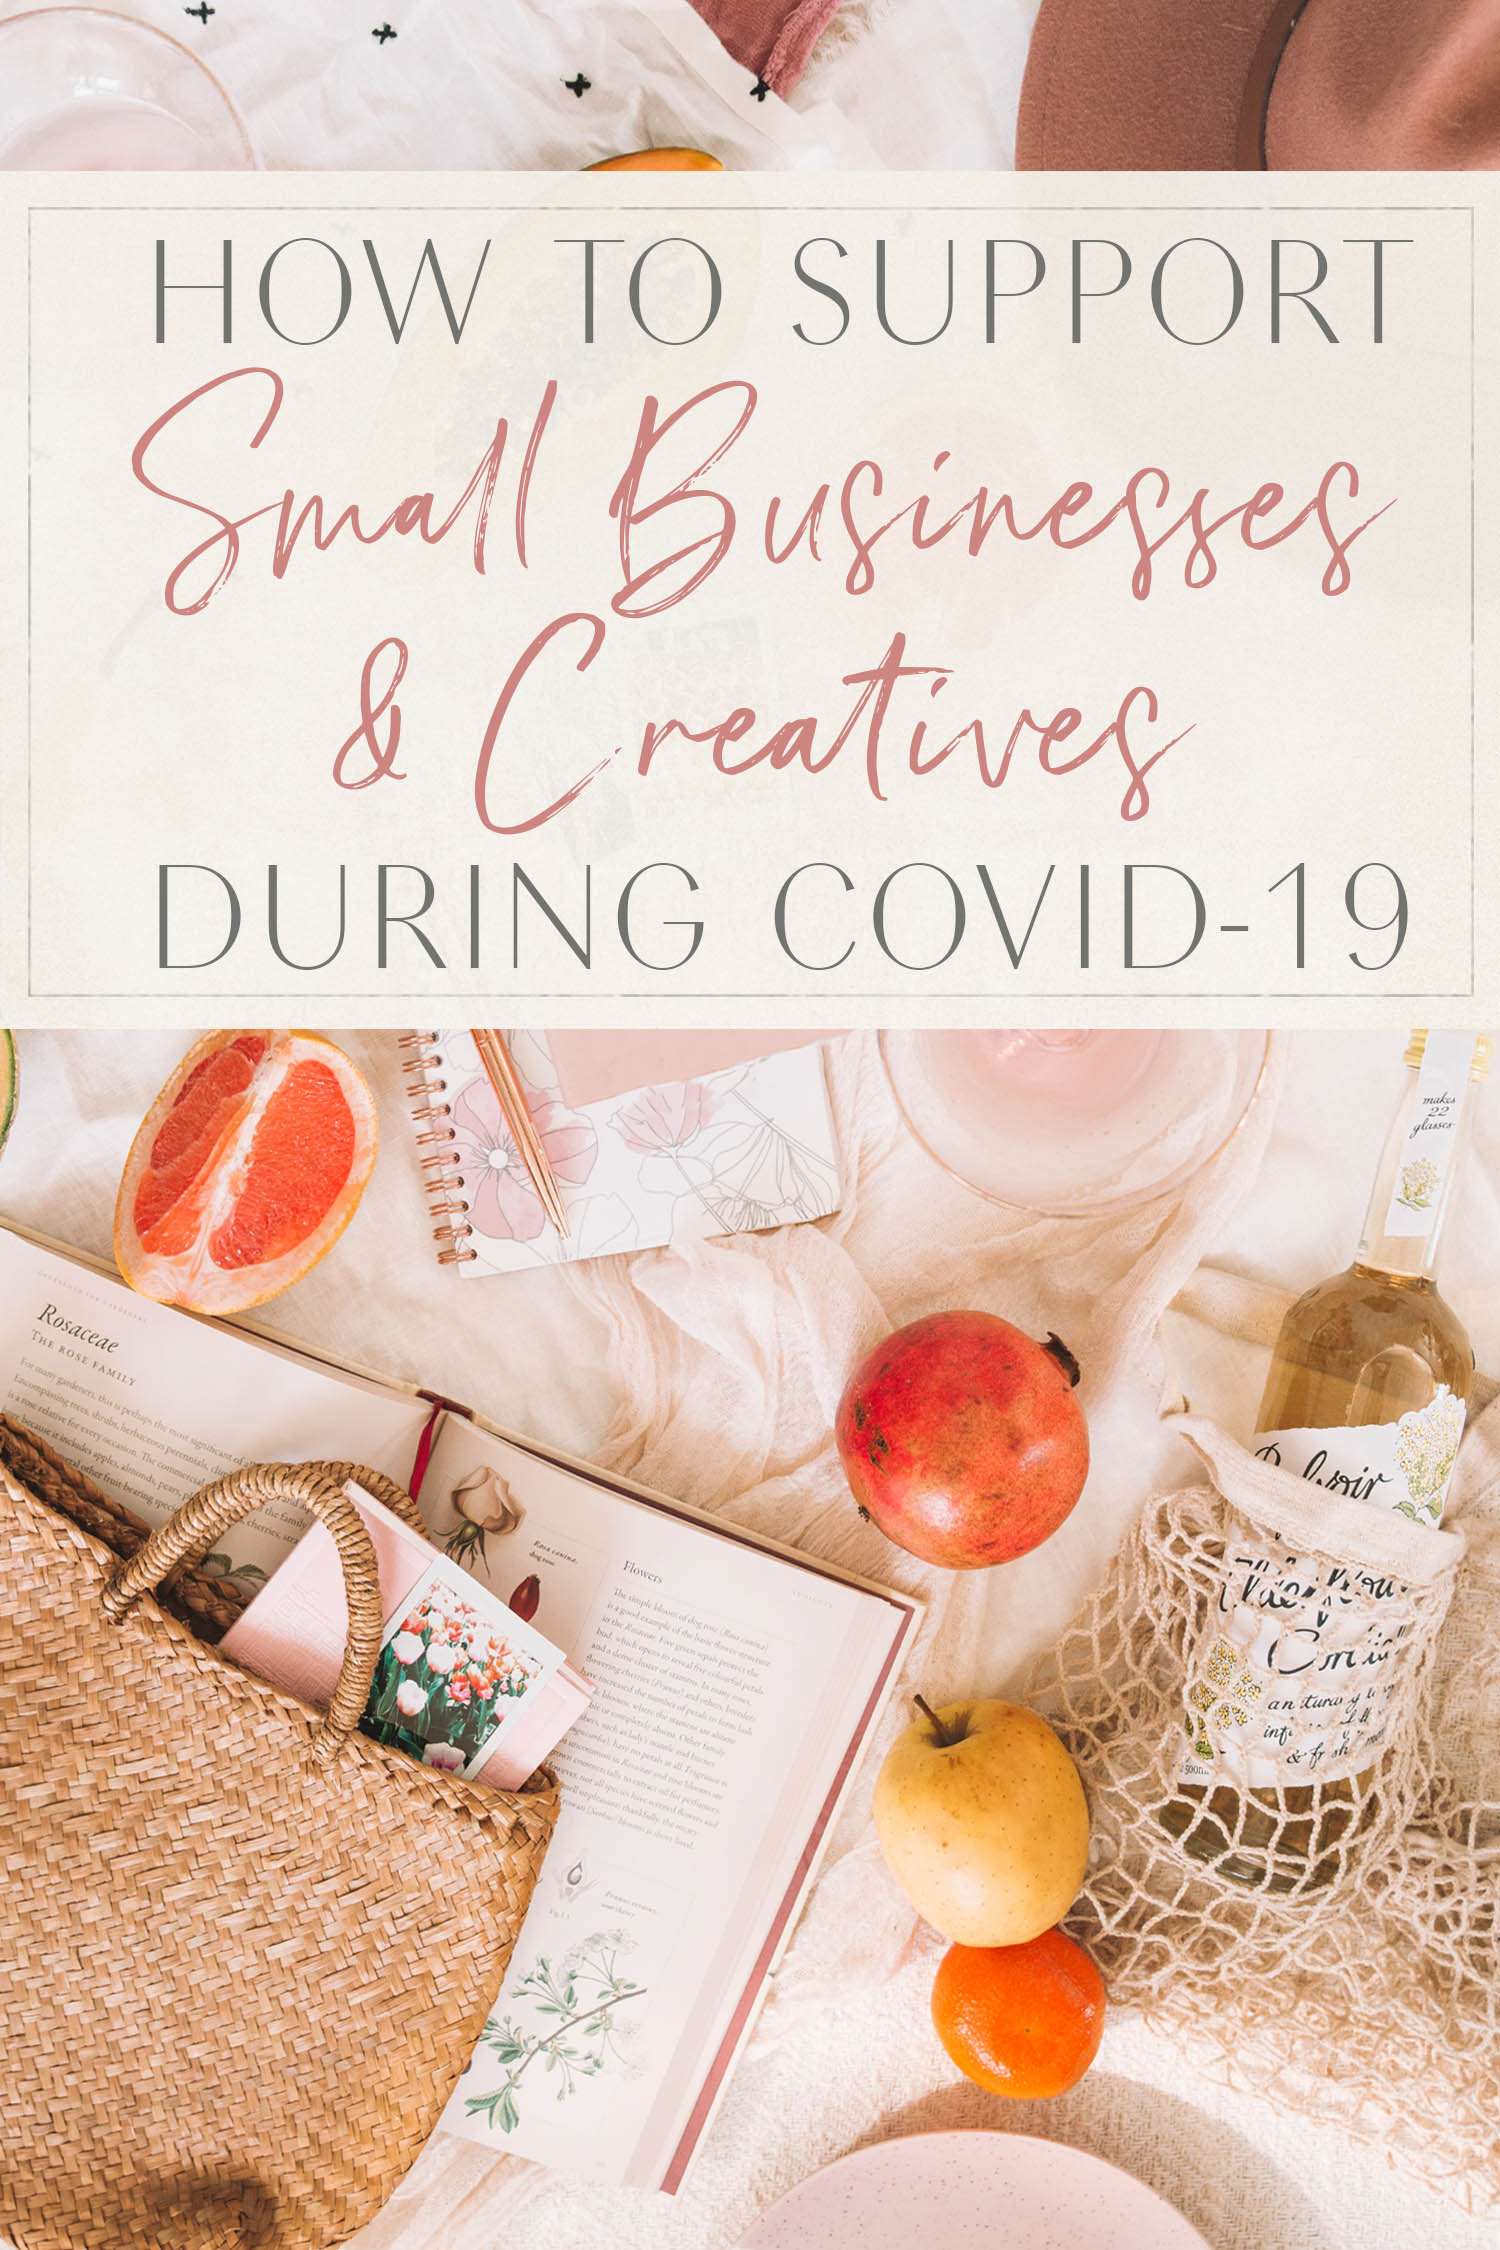 3How to Support Small Businesses and Creatives